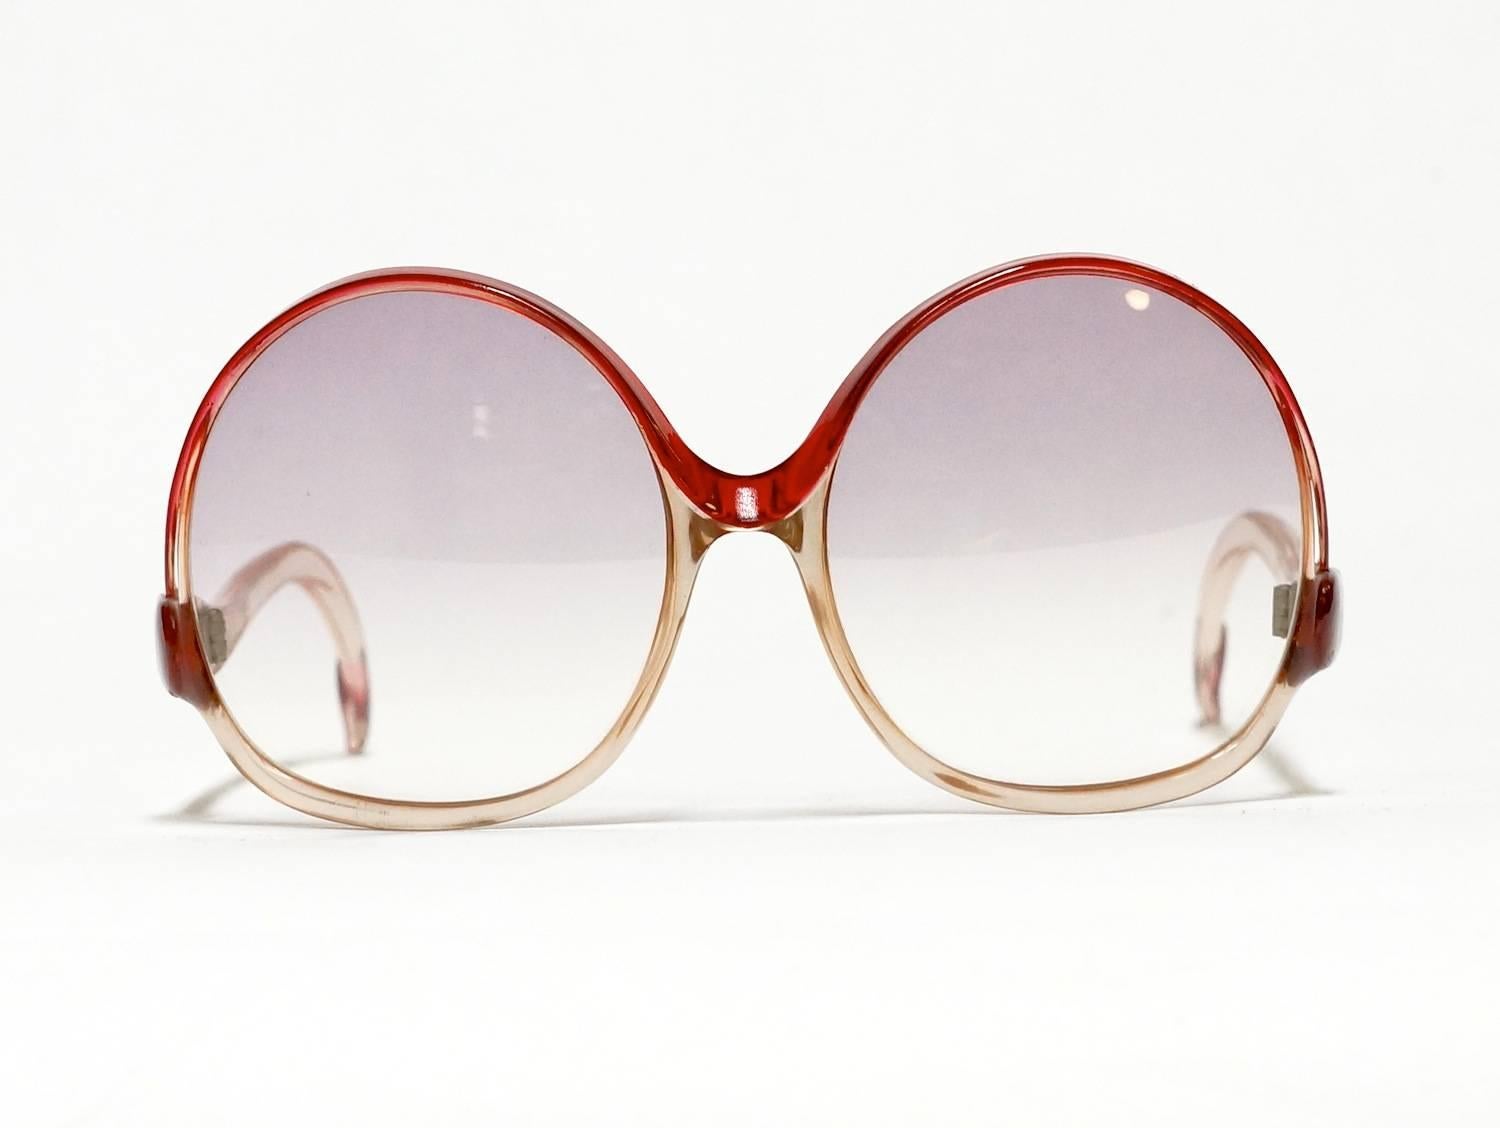 1970s French vintage sunglasses by Balenciaga. Red to clear oversized plastic frame with gradient lenses. 

model: 7697

approximate dimensions: 
temple length: 130 mm - 5 1/8